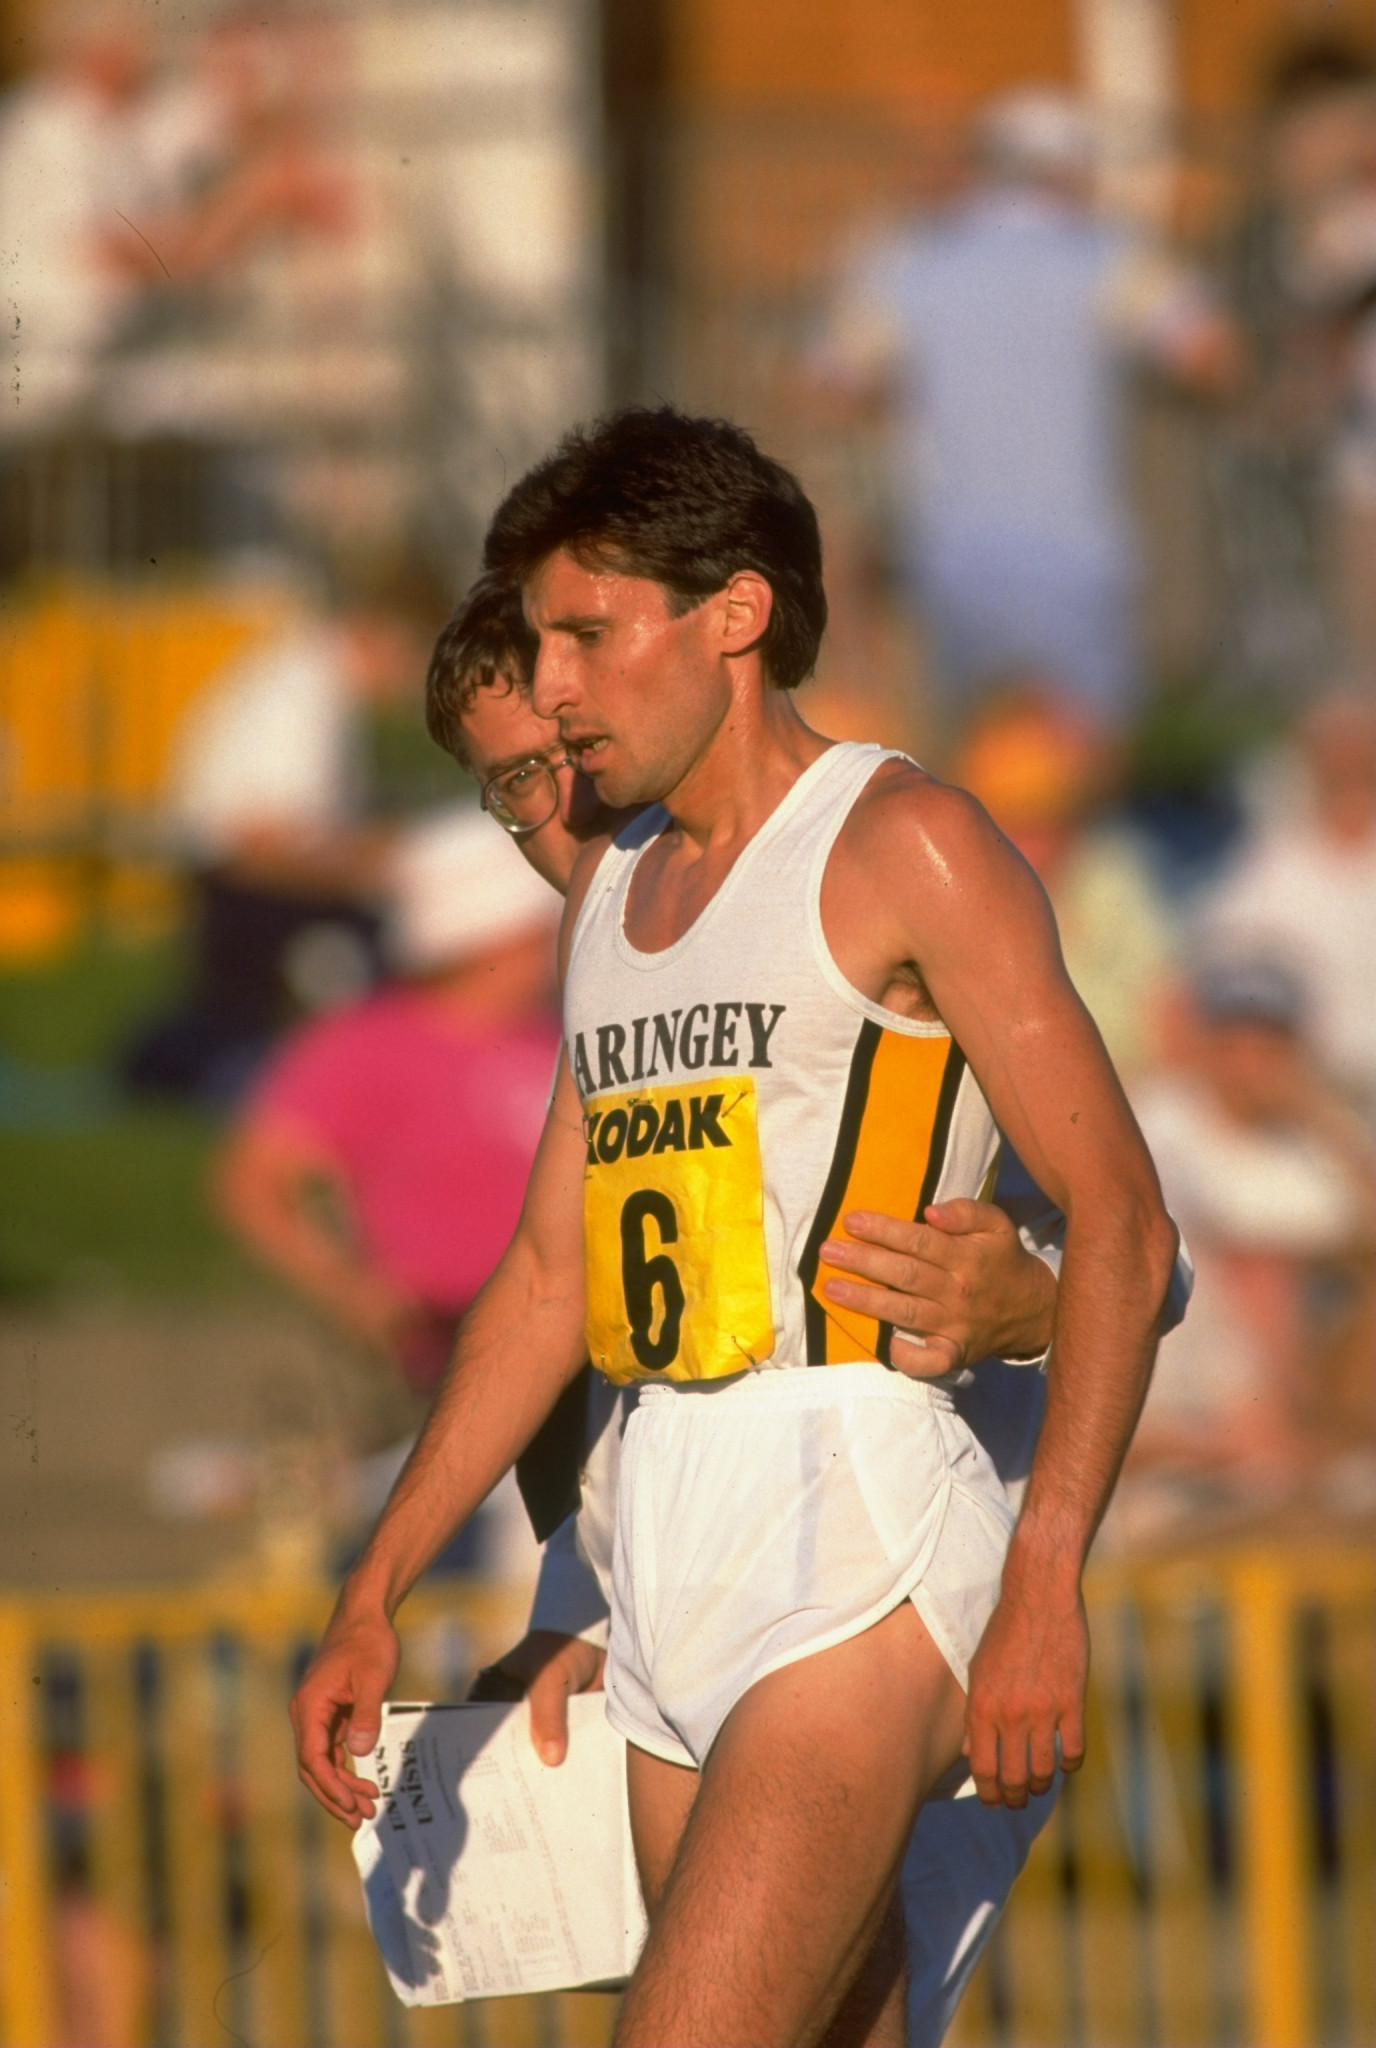 Double Olympic 1500m champion Sebastian Coe is consoled after being knocked out in the heat of the British Olympic trials for Seoul 1988 ©Getty Images